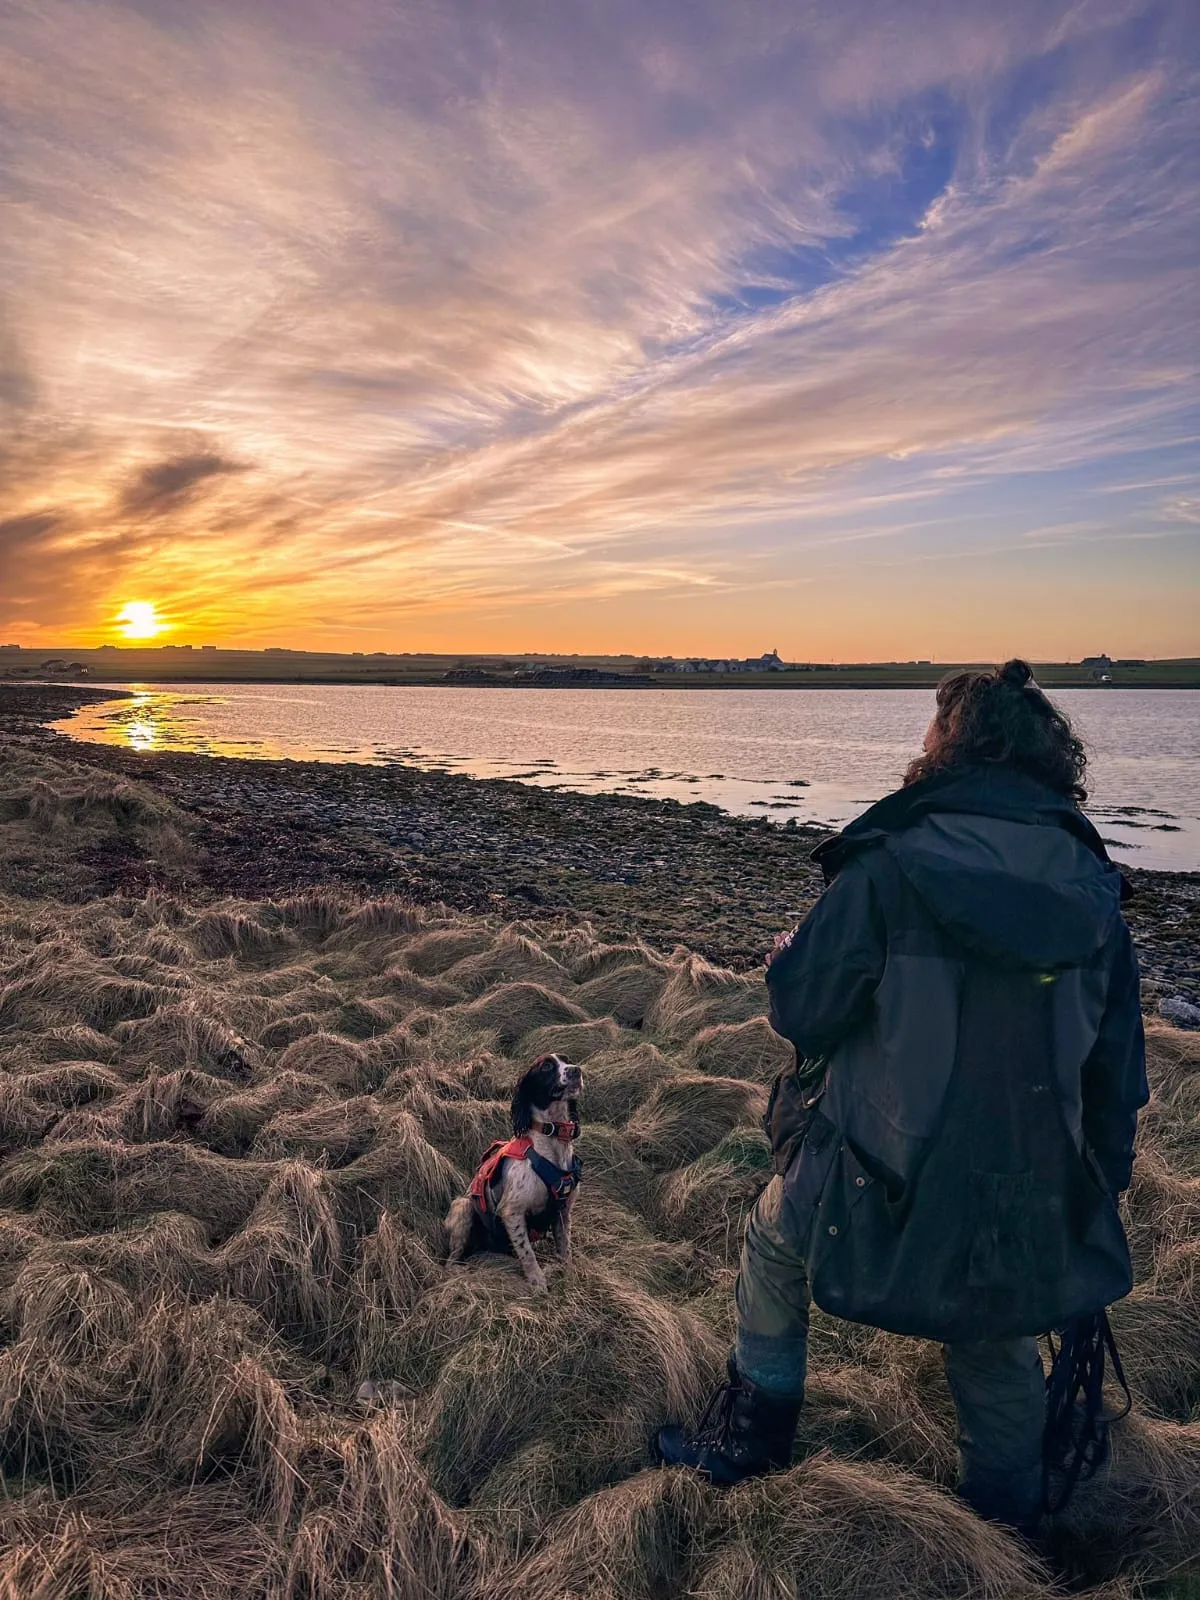 A researcher plays with her dog at sunrise on the banks of a river.